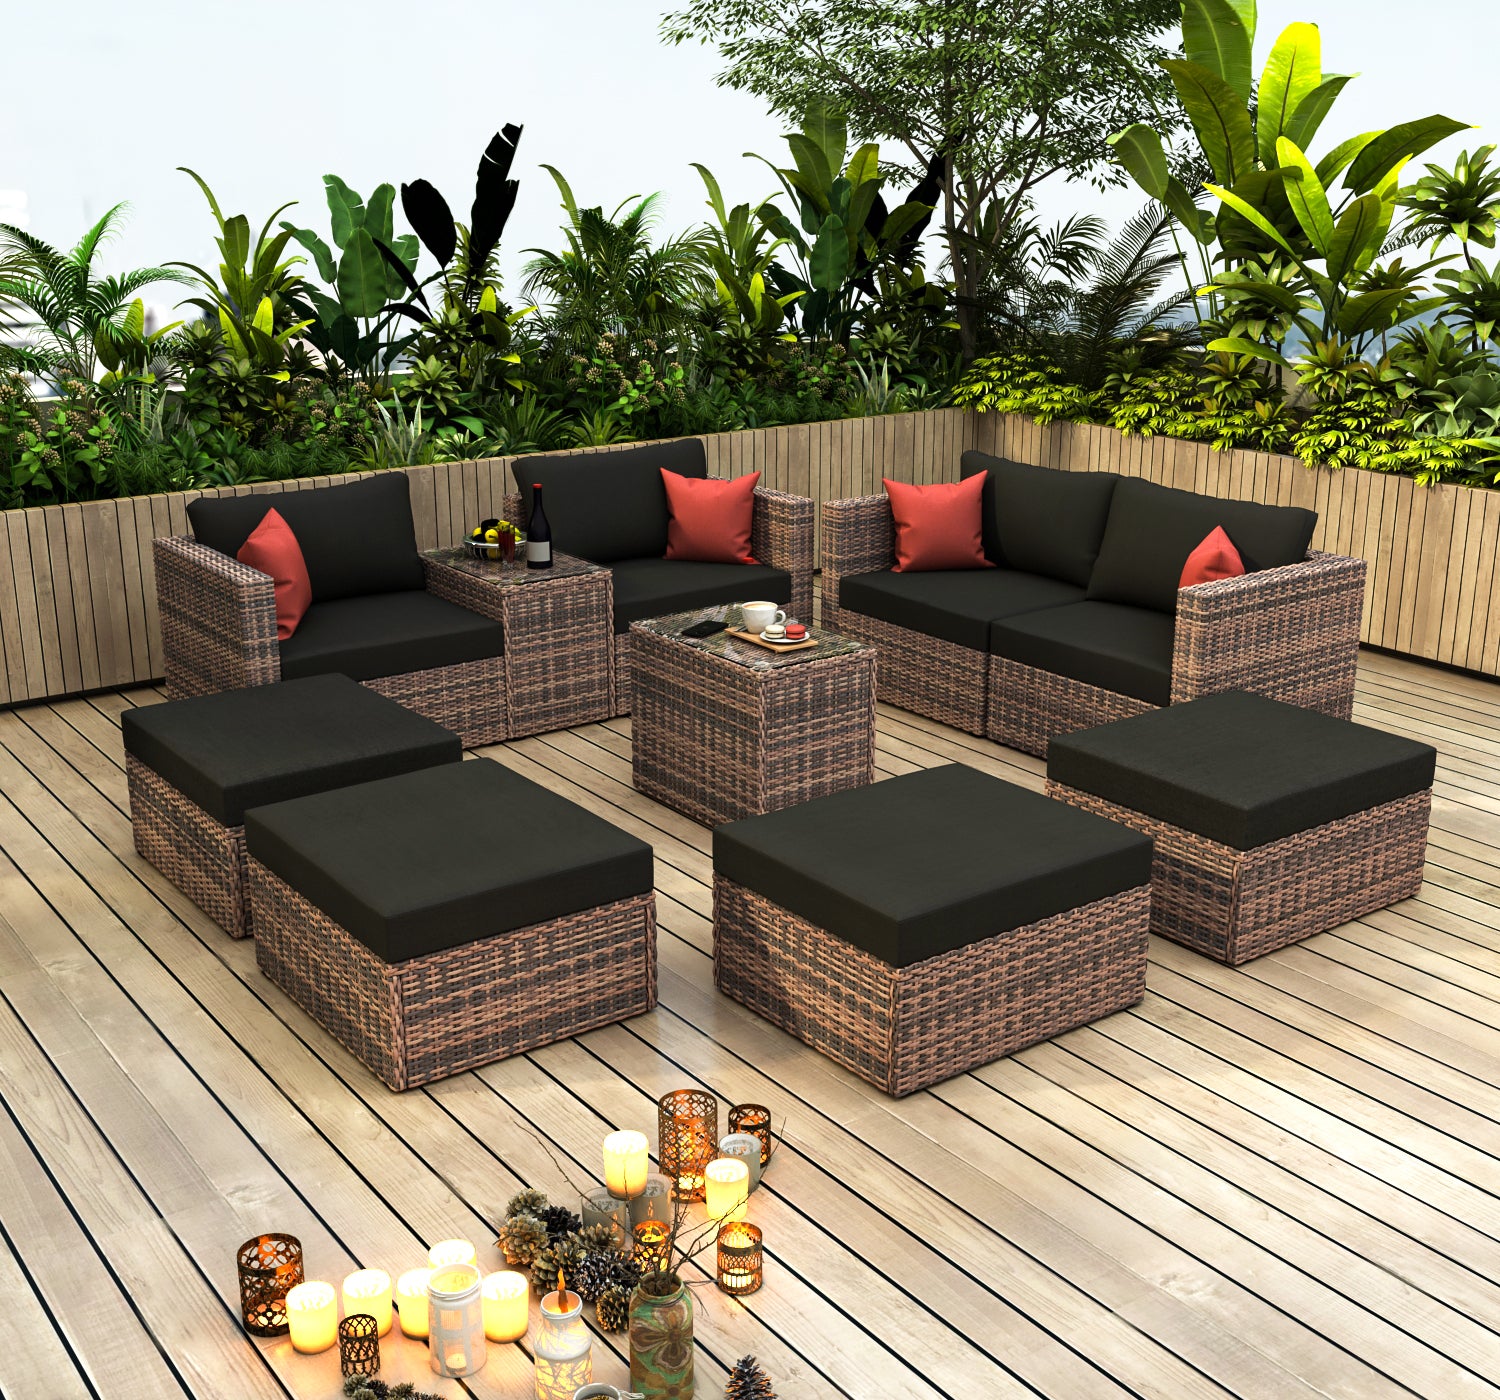 10 piece brown rattan wicker set with black cushions, outdoor patio set with coffee table